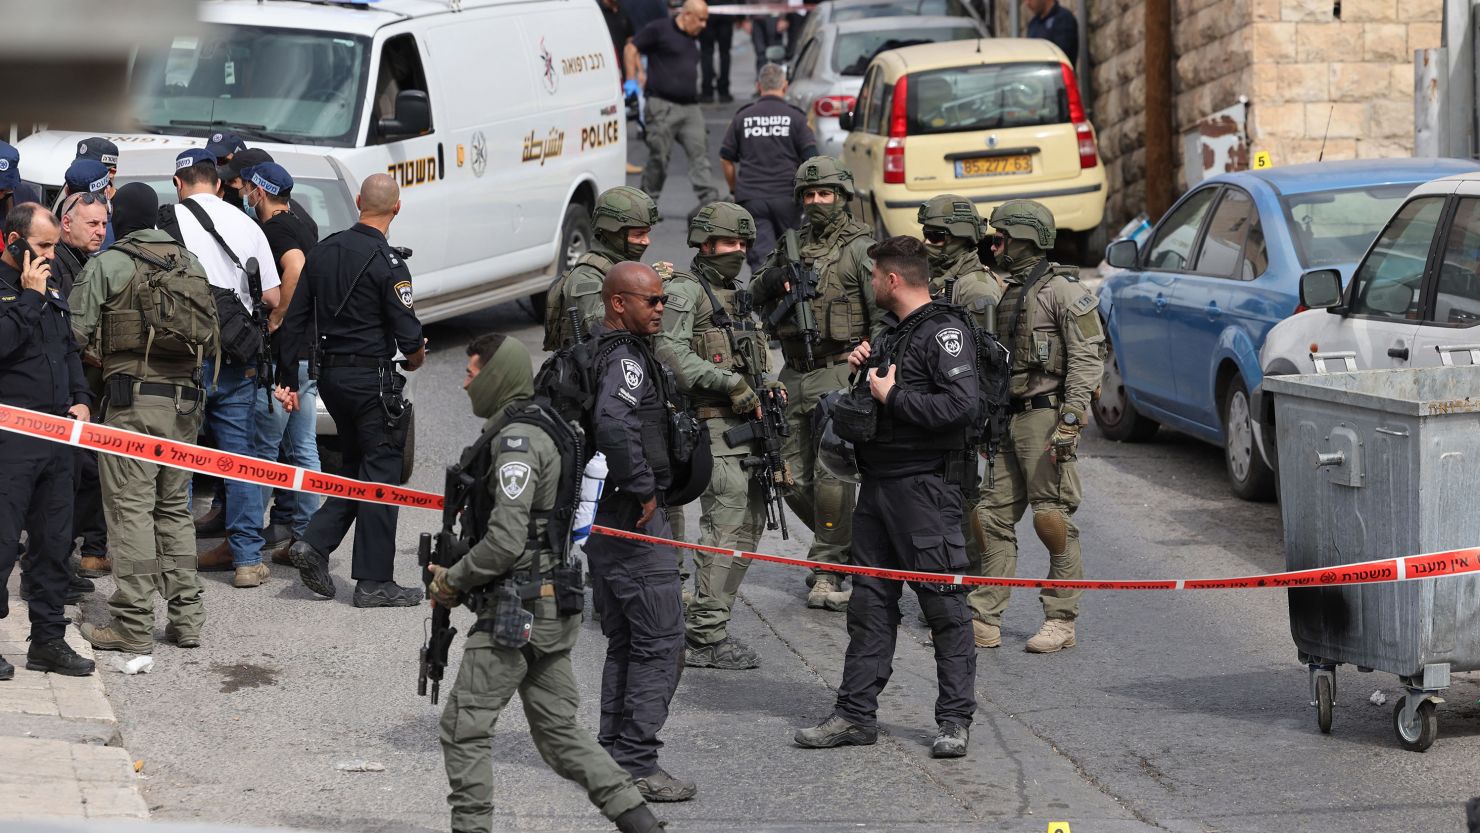 Israeli security forces and emergency services personnel gather at a cordoned-off area near the scene of Saturday's attack in Jerusalem.